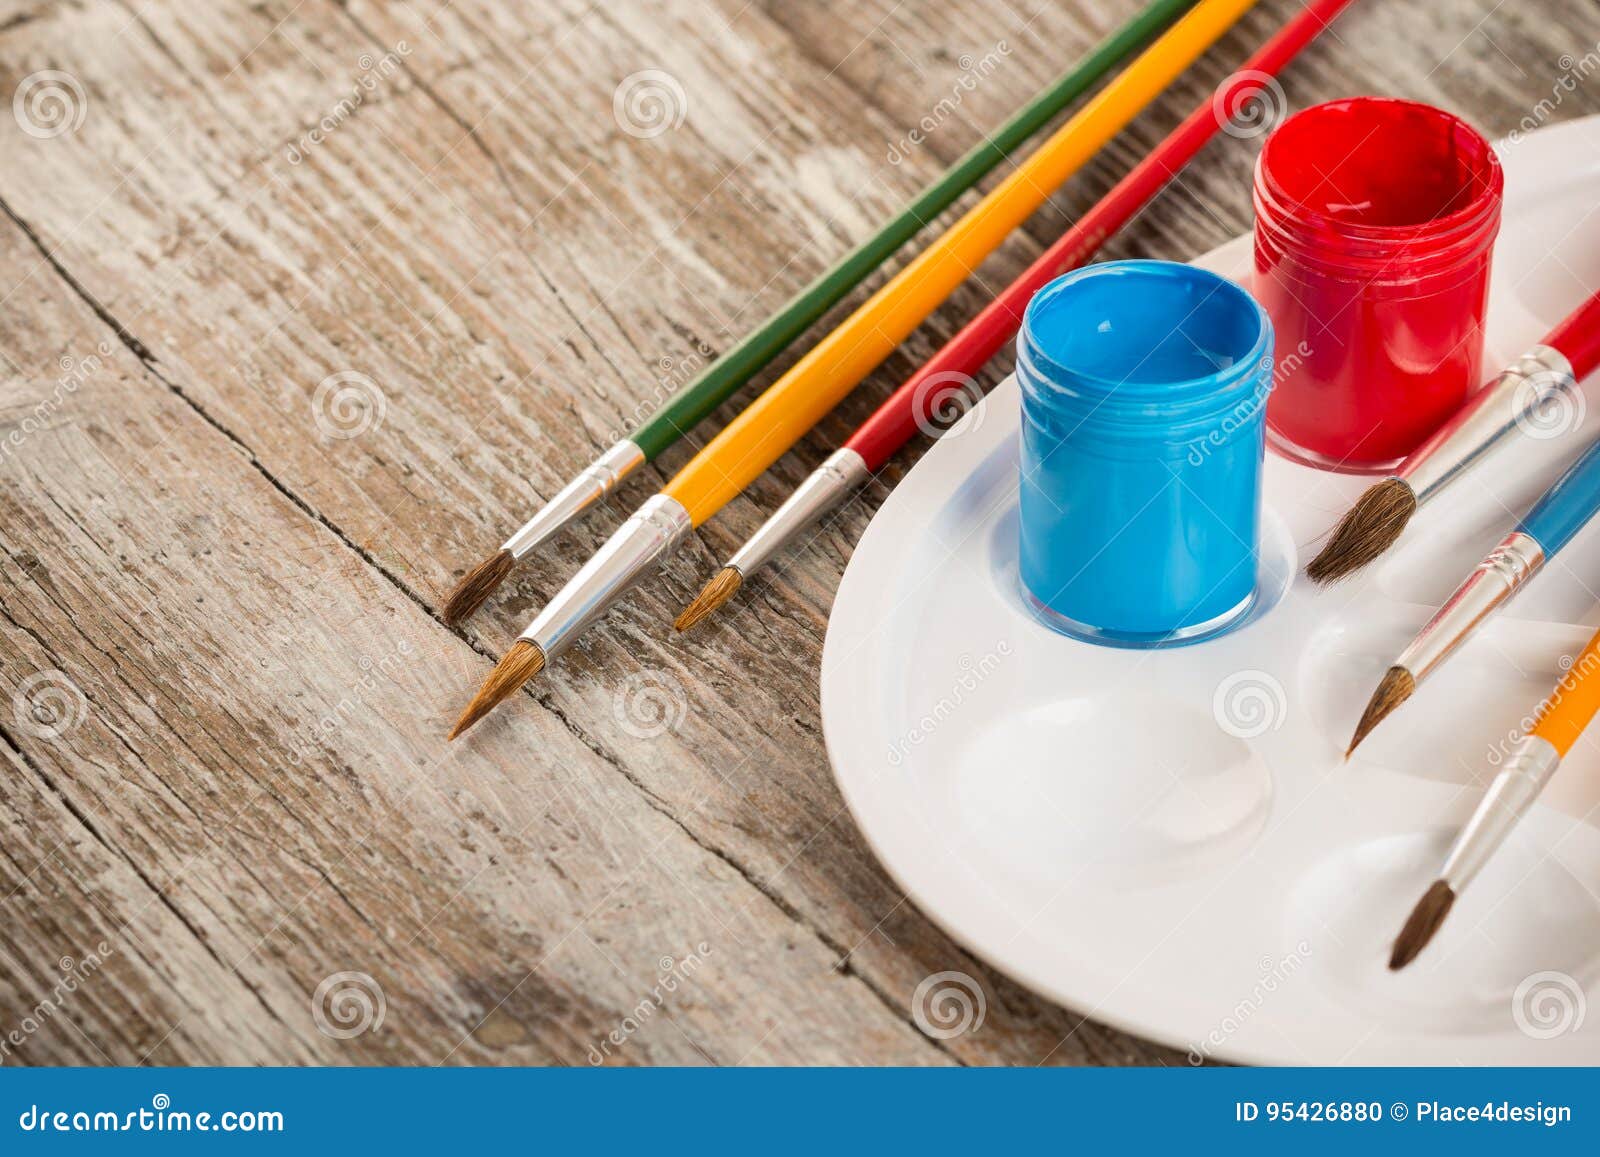 Special painting tools stock photo. Image of abstract - 95426880